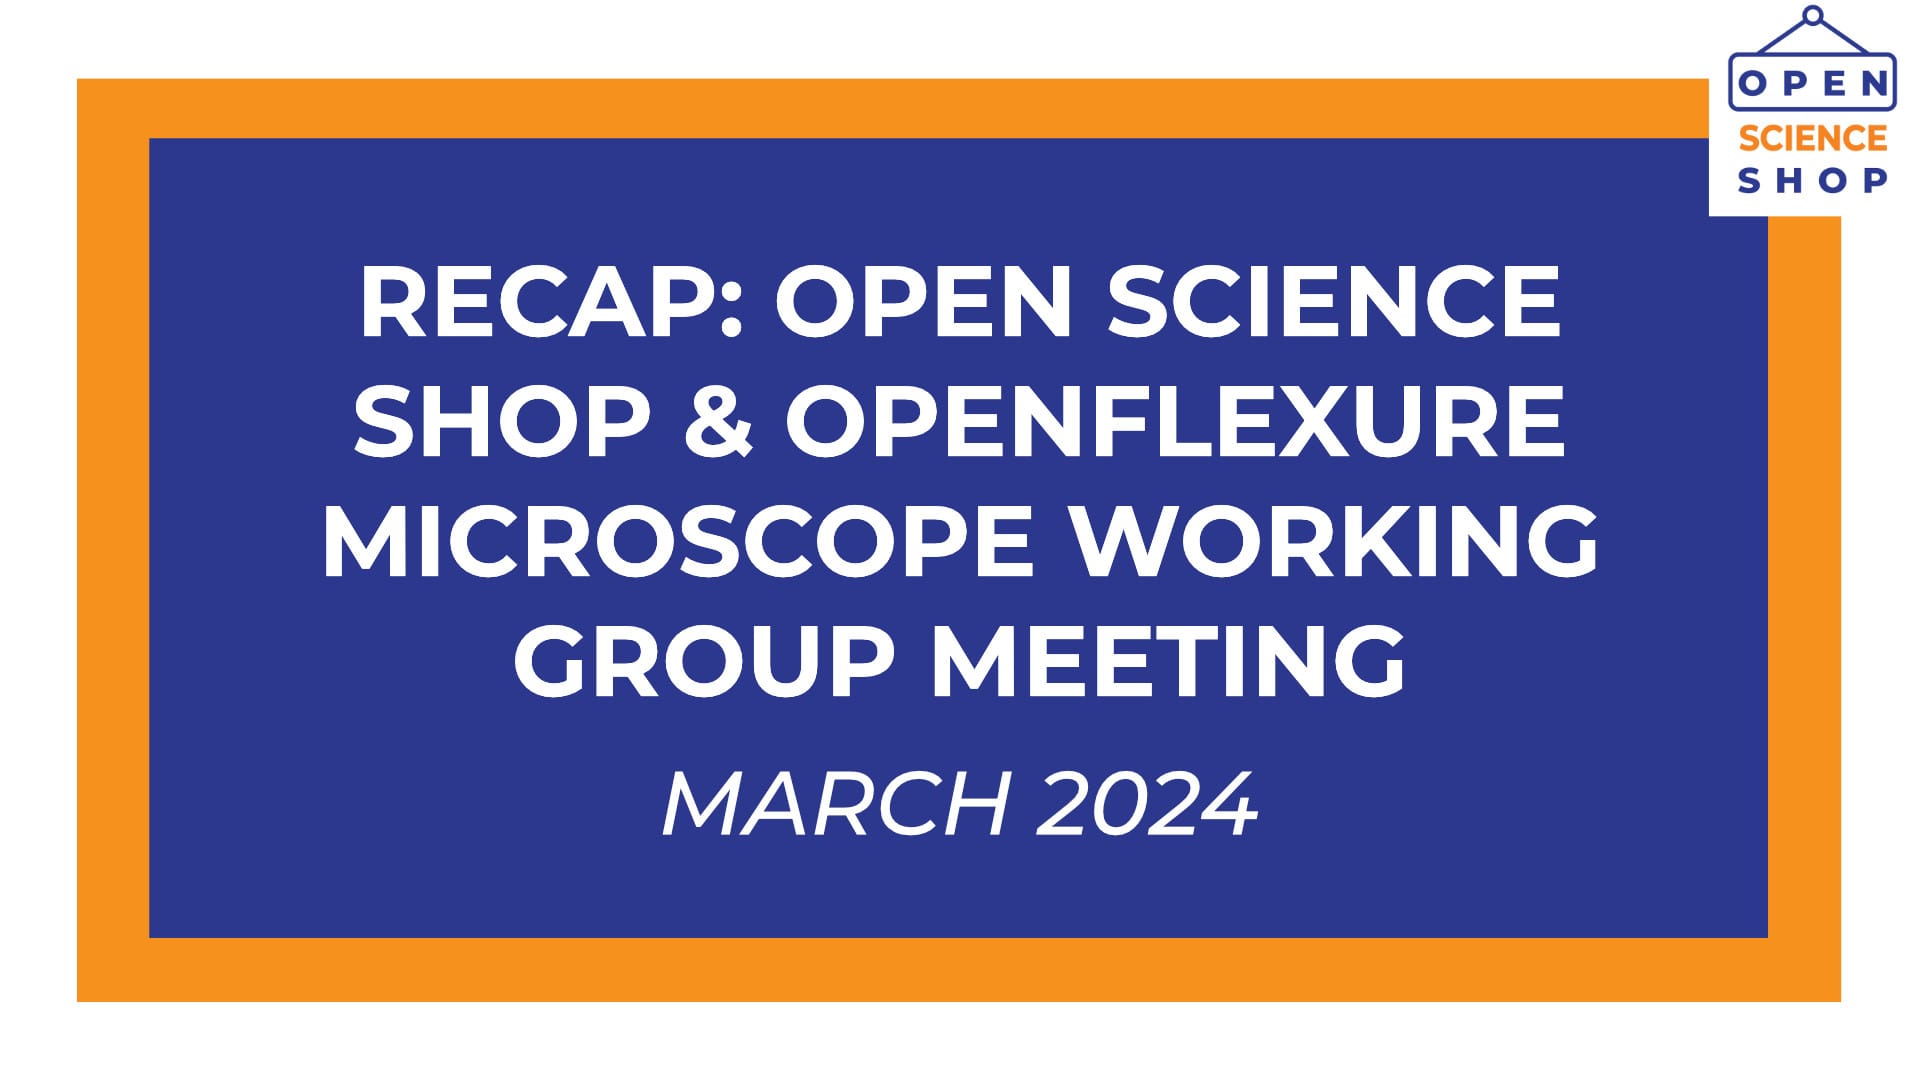 White text on a blue background reads "Recap: Open Science Shop & OpenFlexure Microscope Working Group Meeting, March 2024".